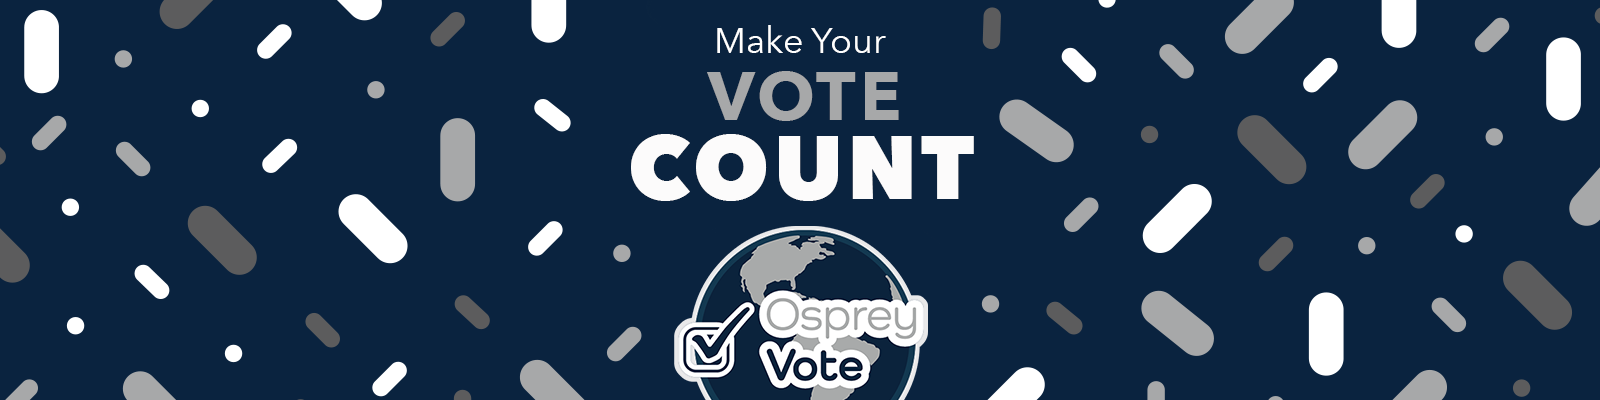 make your vote count with confetti in white and gray on navy with osprey vote icon